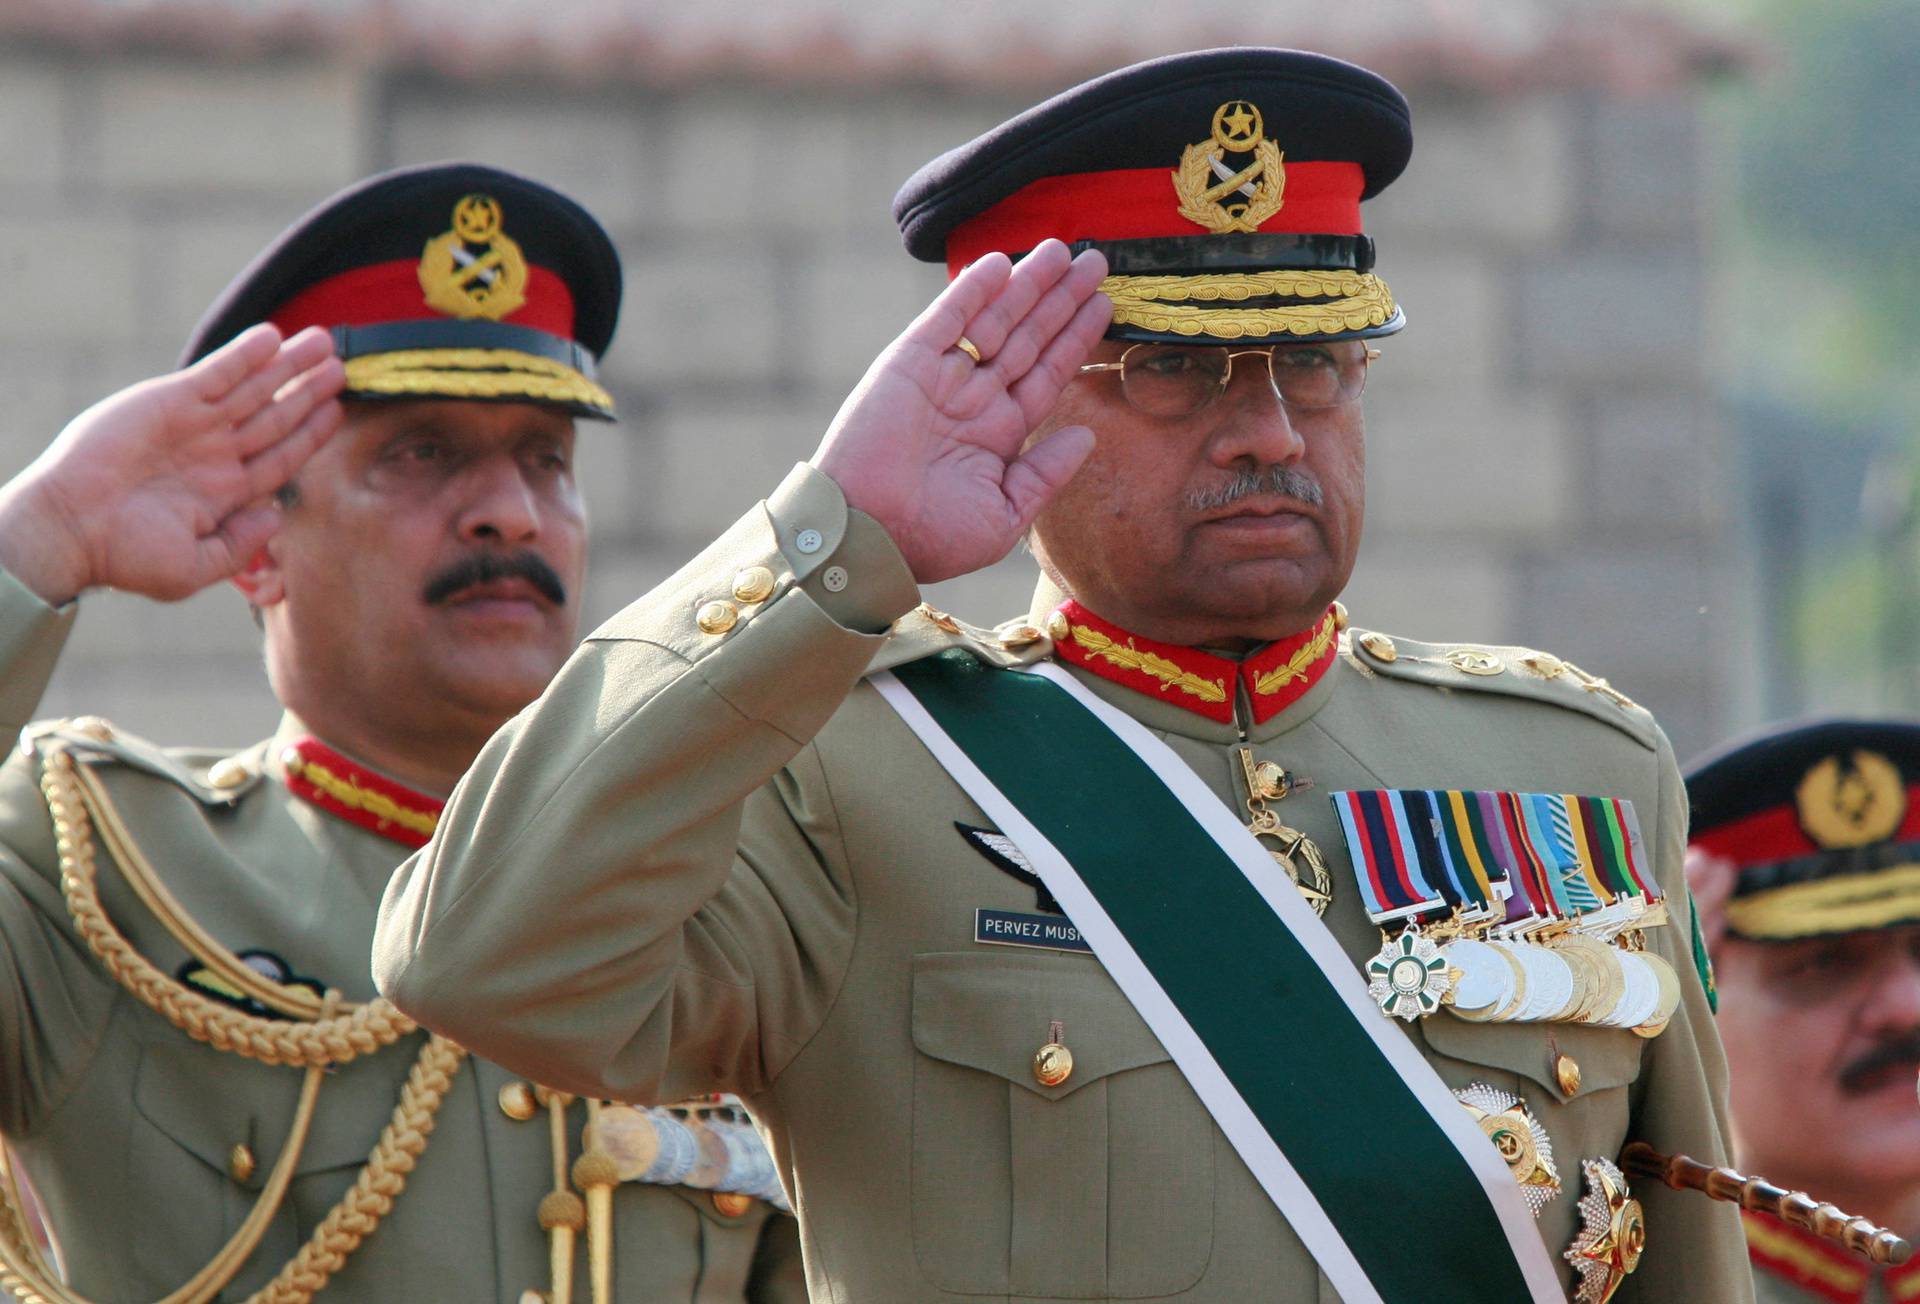 FILE PHOTO: Pakistan's General Pervez Musharraf salutes during the playing of Pakistan's national anthem at the Joint Staff headquarters in Rawalpindi